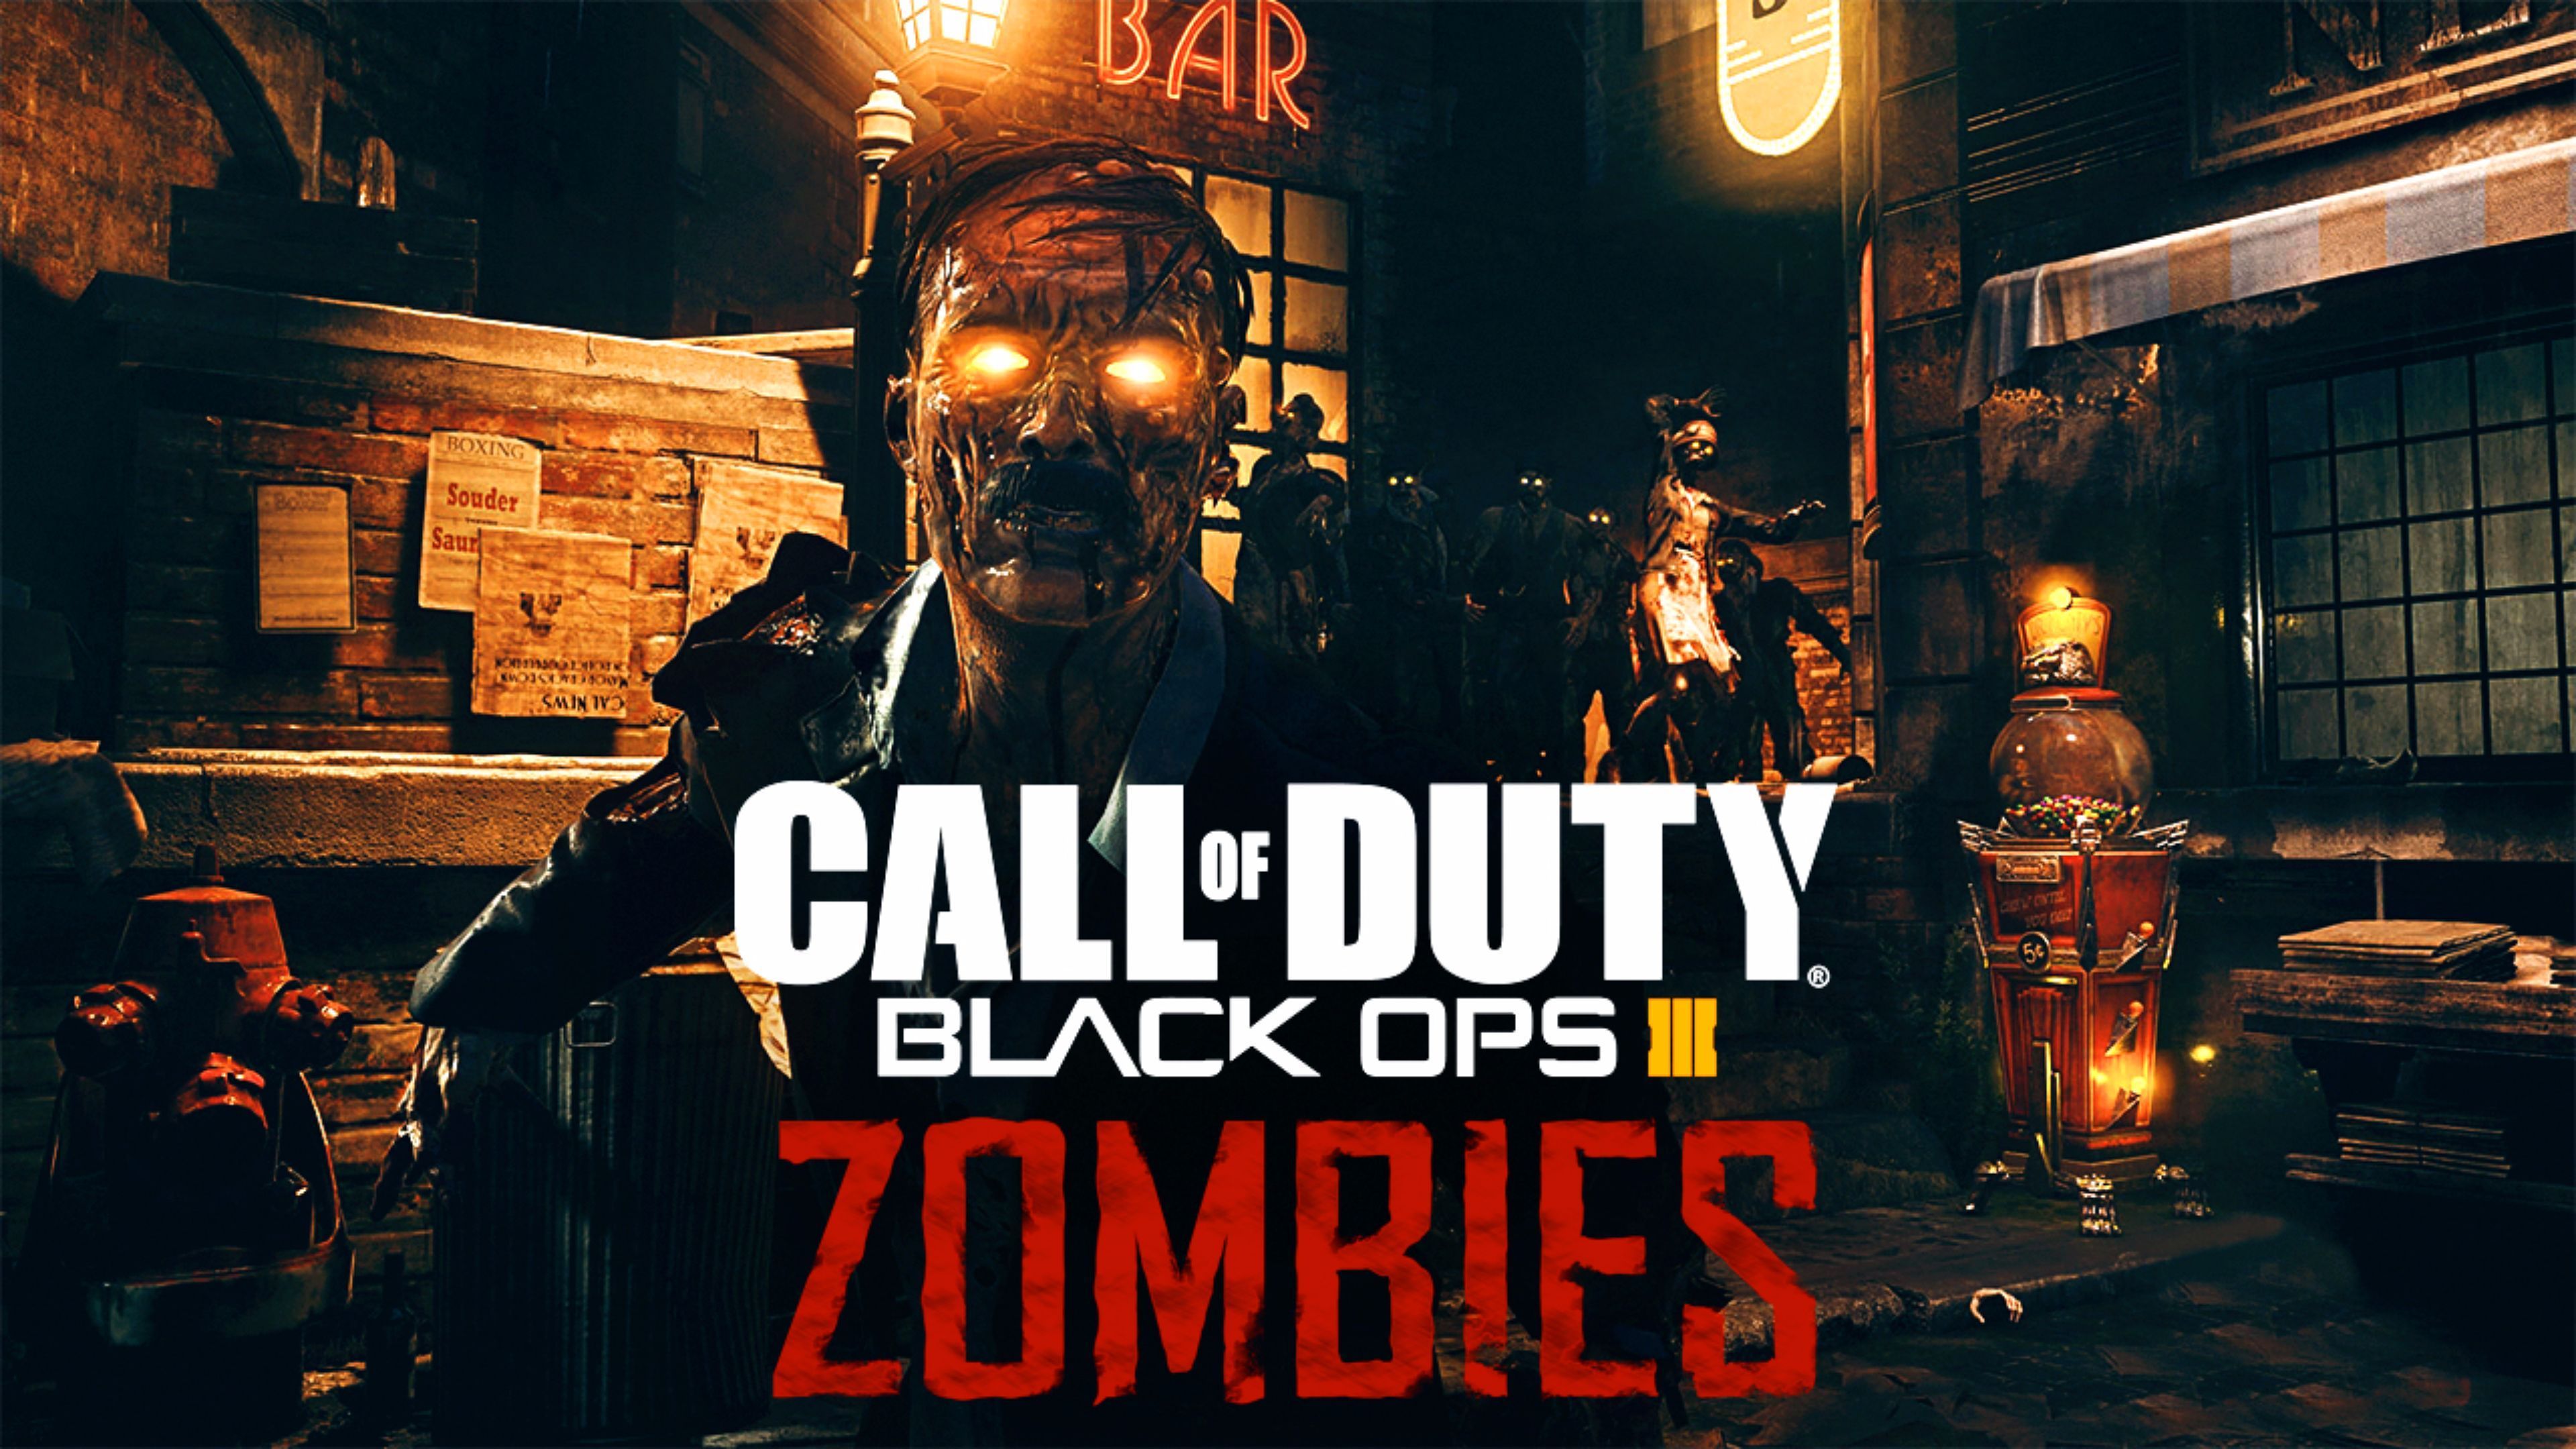 3 Black Ops Zombies Wallpapers on WallpaperDog